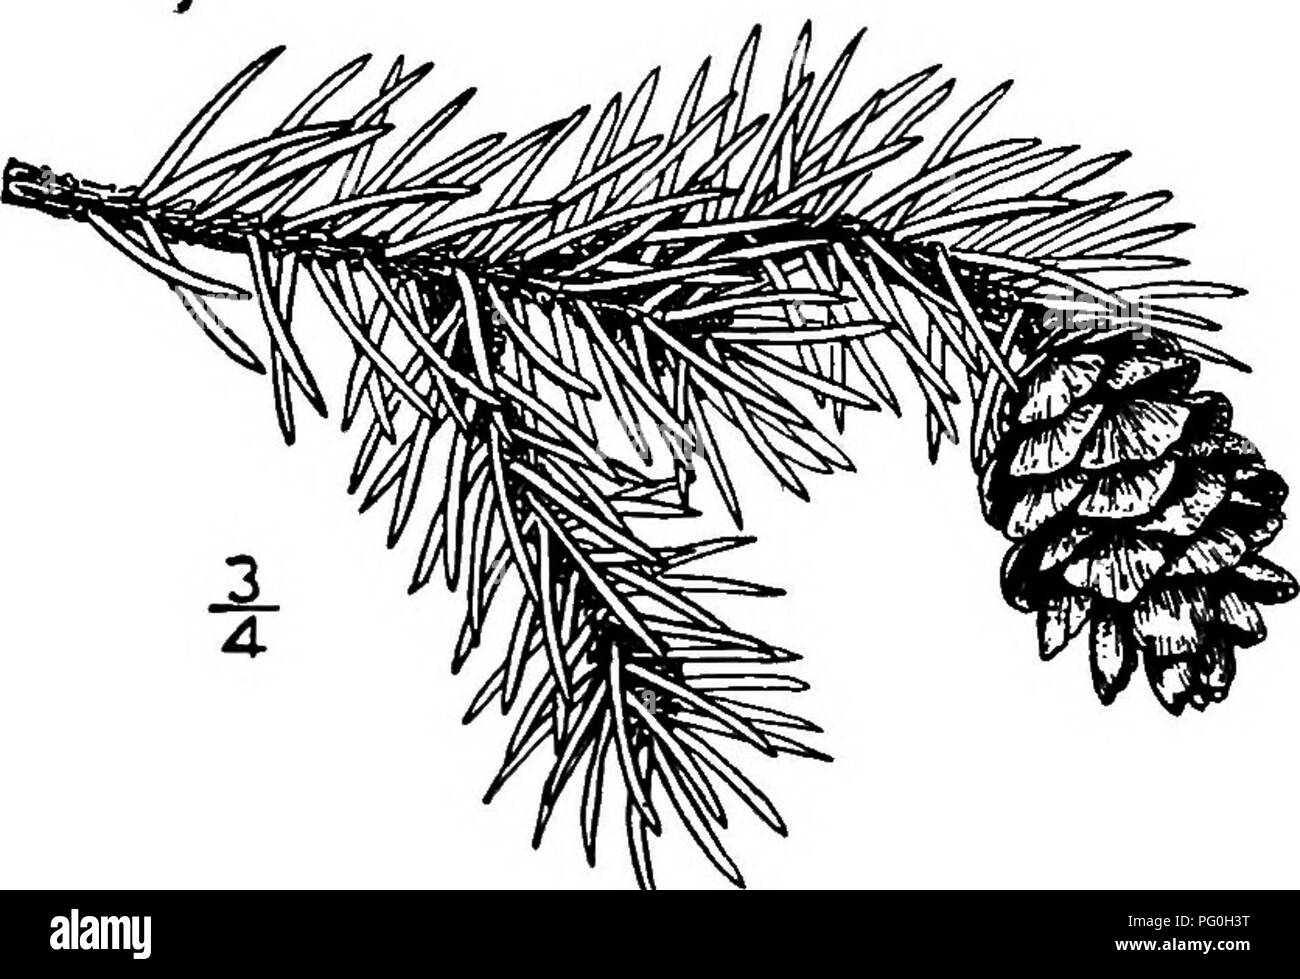 . North American trees : being descriptions and illustrations of the trees growing independently of cultivation in North America, north of Mexico and the West Indies . Trees. 58 The Spruces sharply pointed, about 3 mm. long, their closely fitting light red-brown scales mi- nutely hairy. The 4-sided leaves are from 0.5 to 1.5 cm. long, somewhat nar- rowed toward the blunt tip, slightly incurved, standing outward in all directions from the branches; they are hght bluish or glaucous green, lighter on the upper surface with many stomata, shining beneath. The staminate flowers are oblong or cylindr Stock Photo